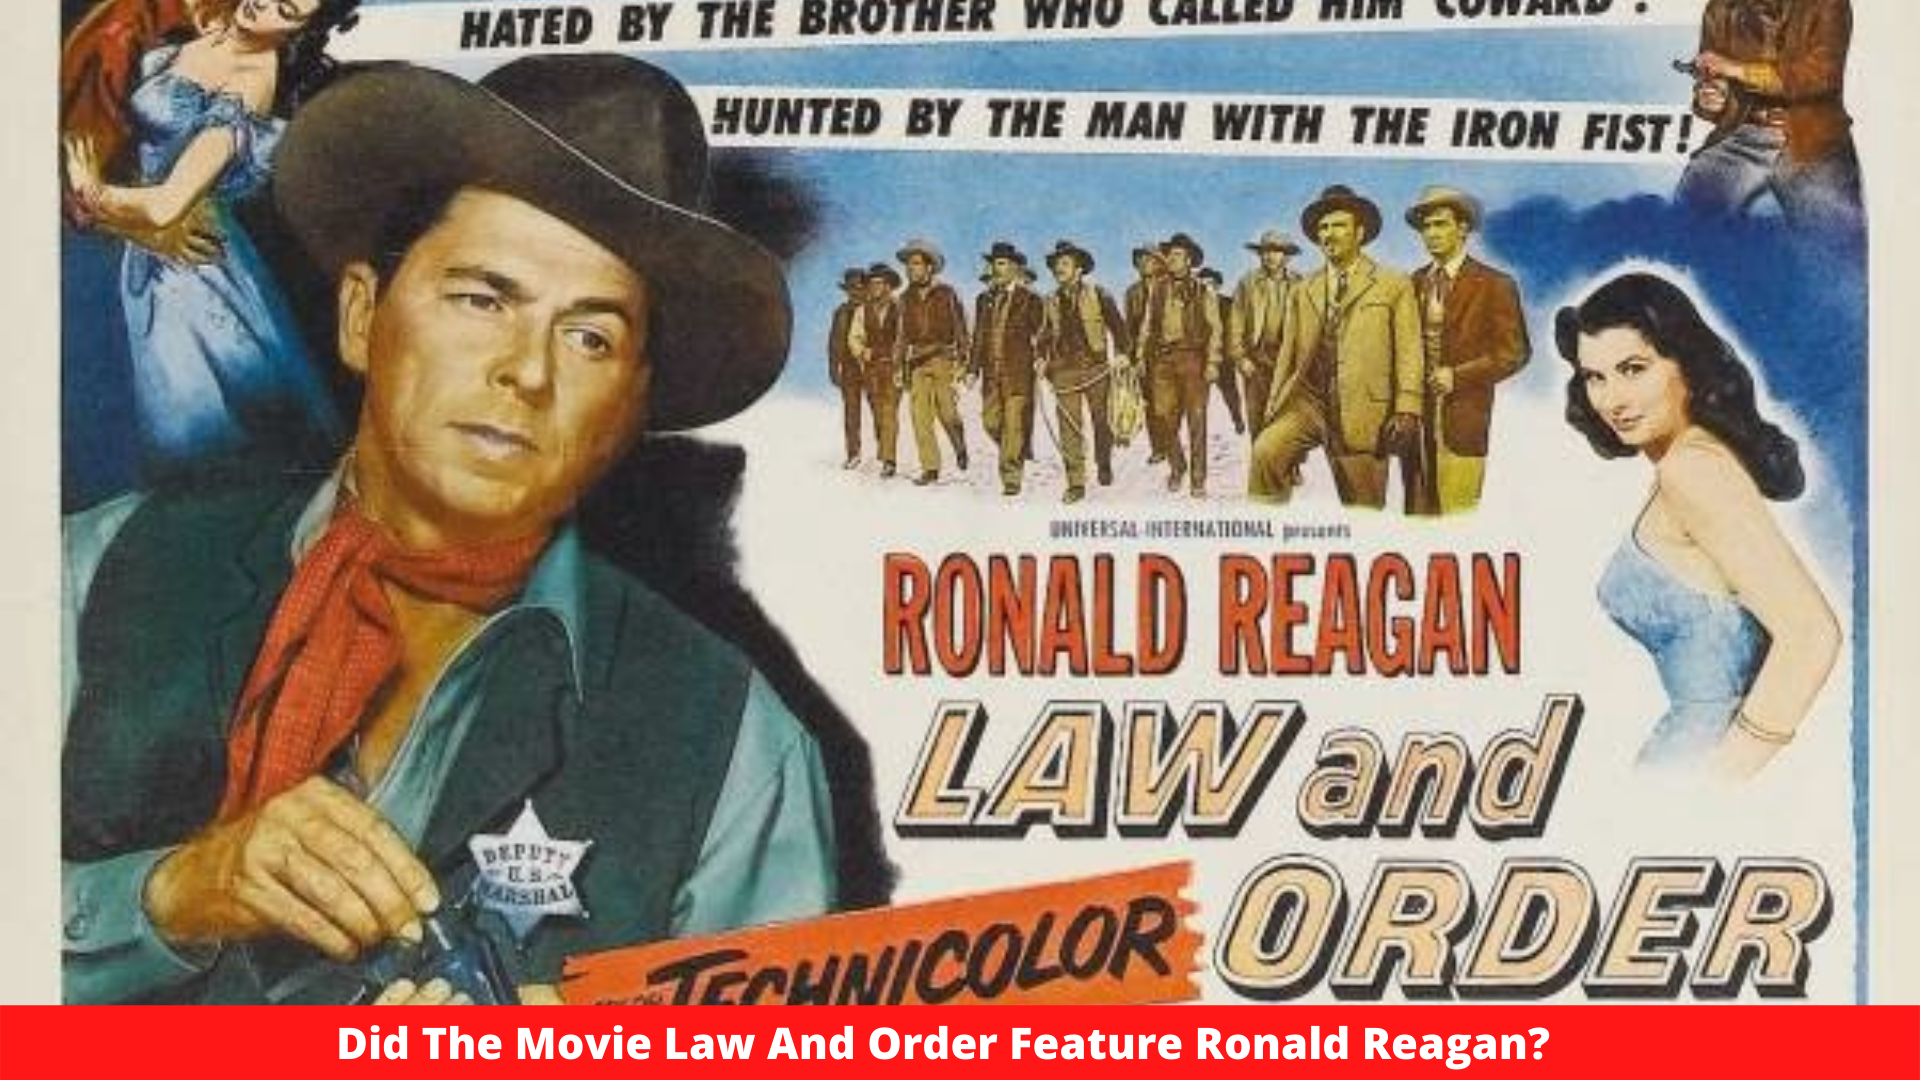 Did The Movie Law And Order Feature Ronald Reagan?